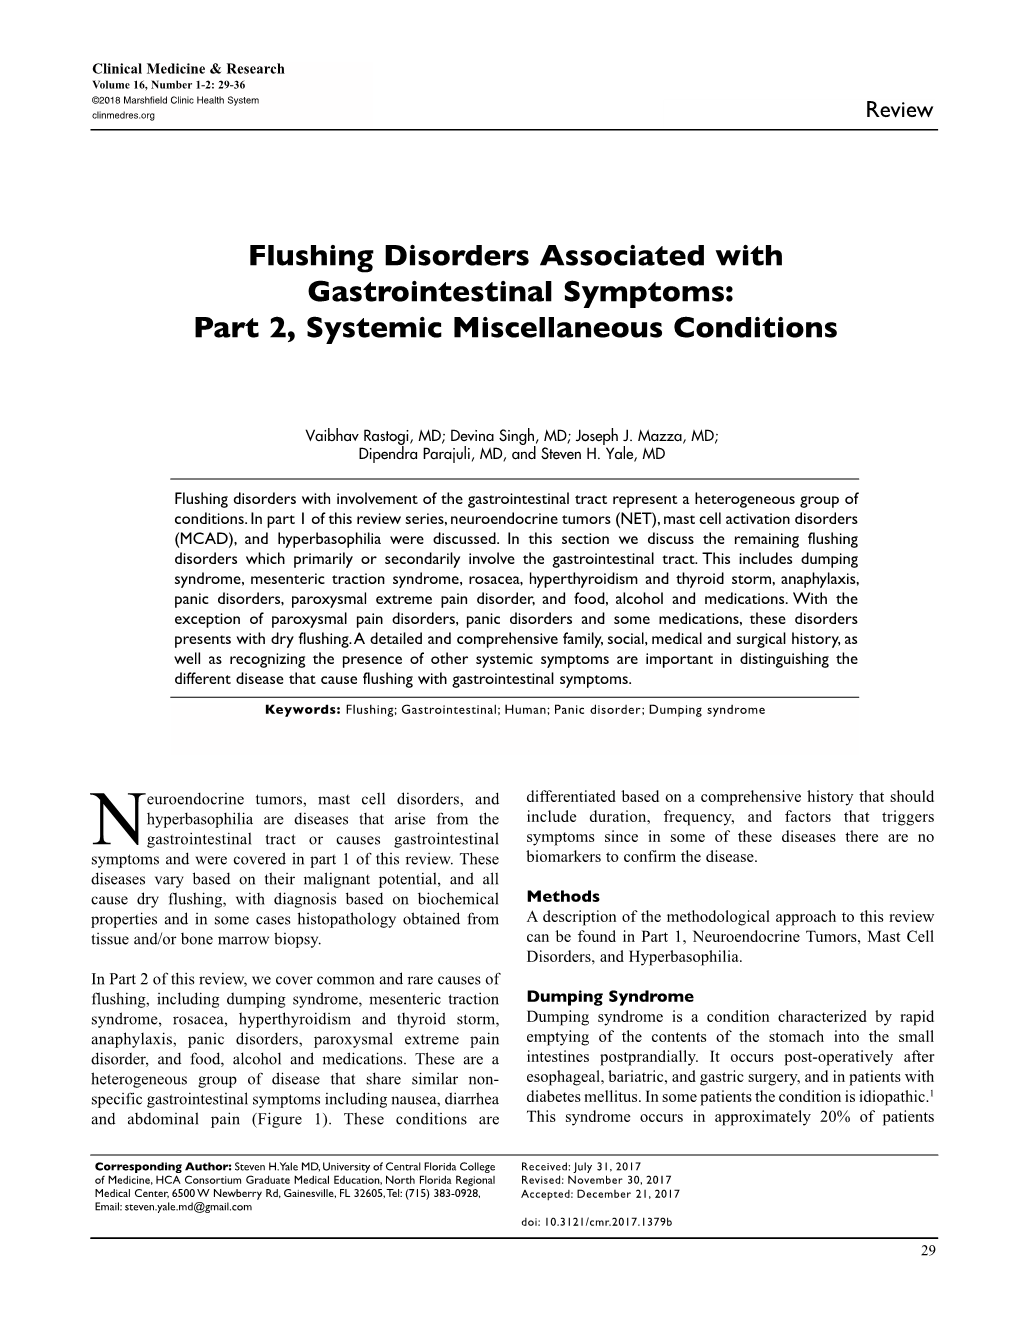 Flushing Disorders Associated with Gastrointestinal Symptoms: Part 2, Systemic Miscellaneous Conditions